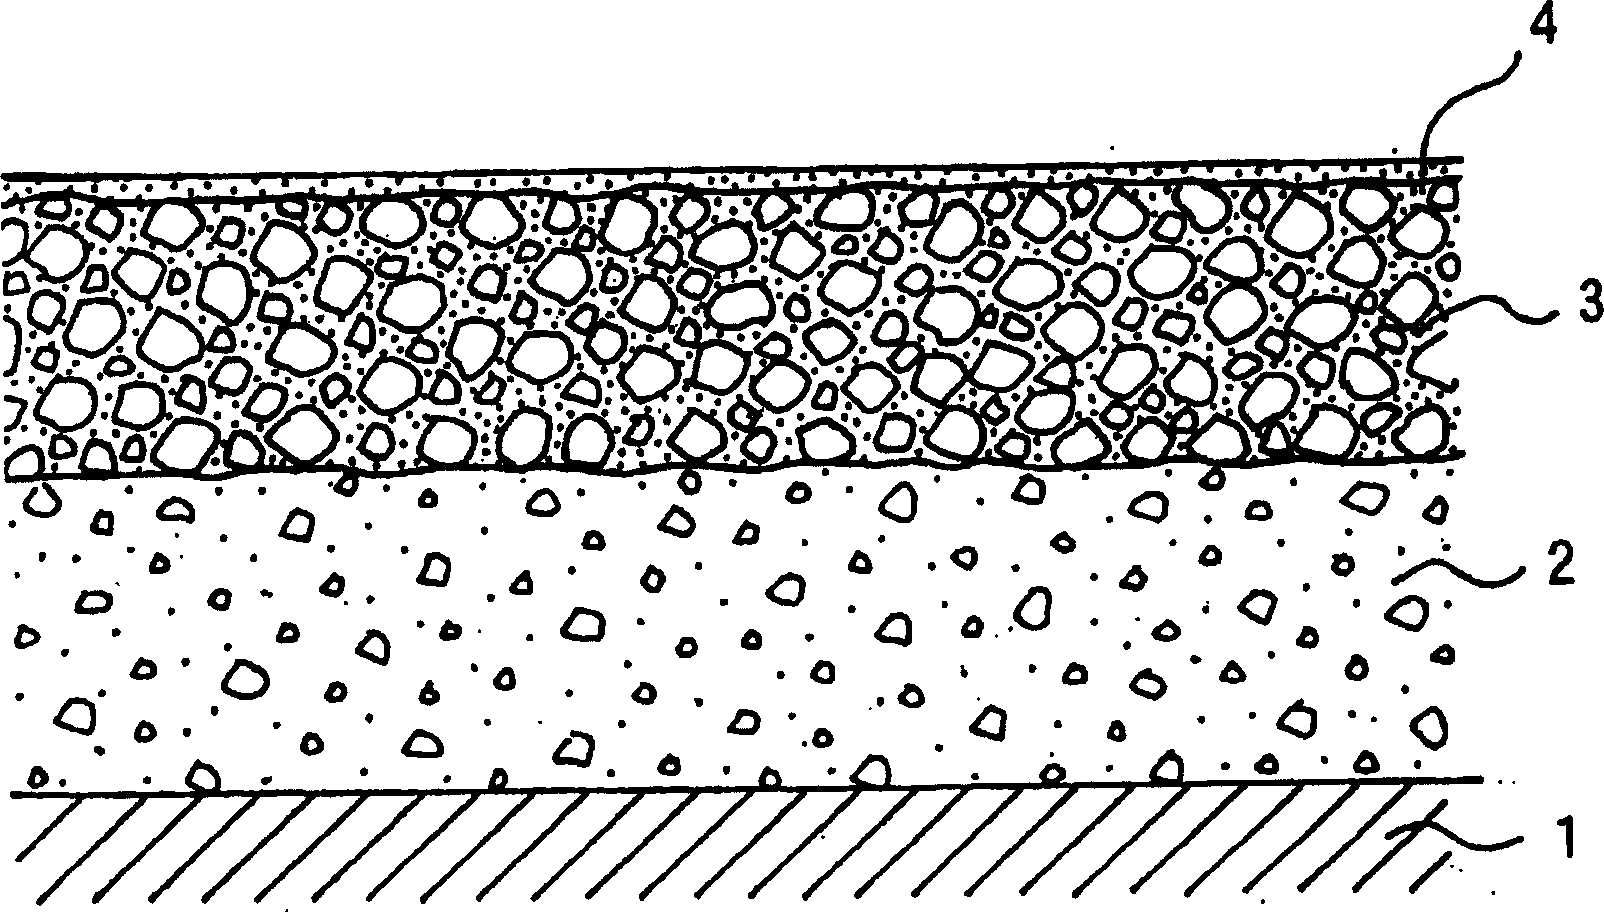 Composition for paving road and paving body using the same composition